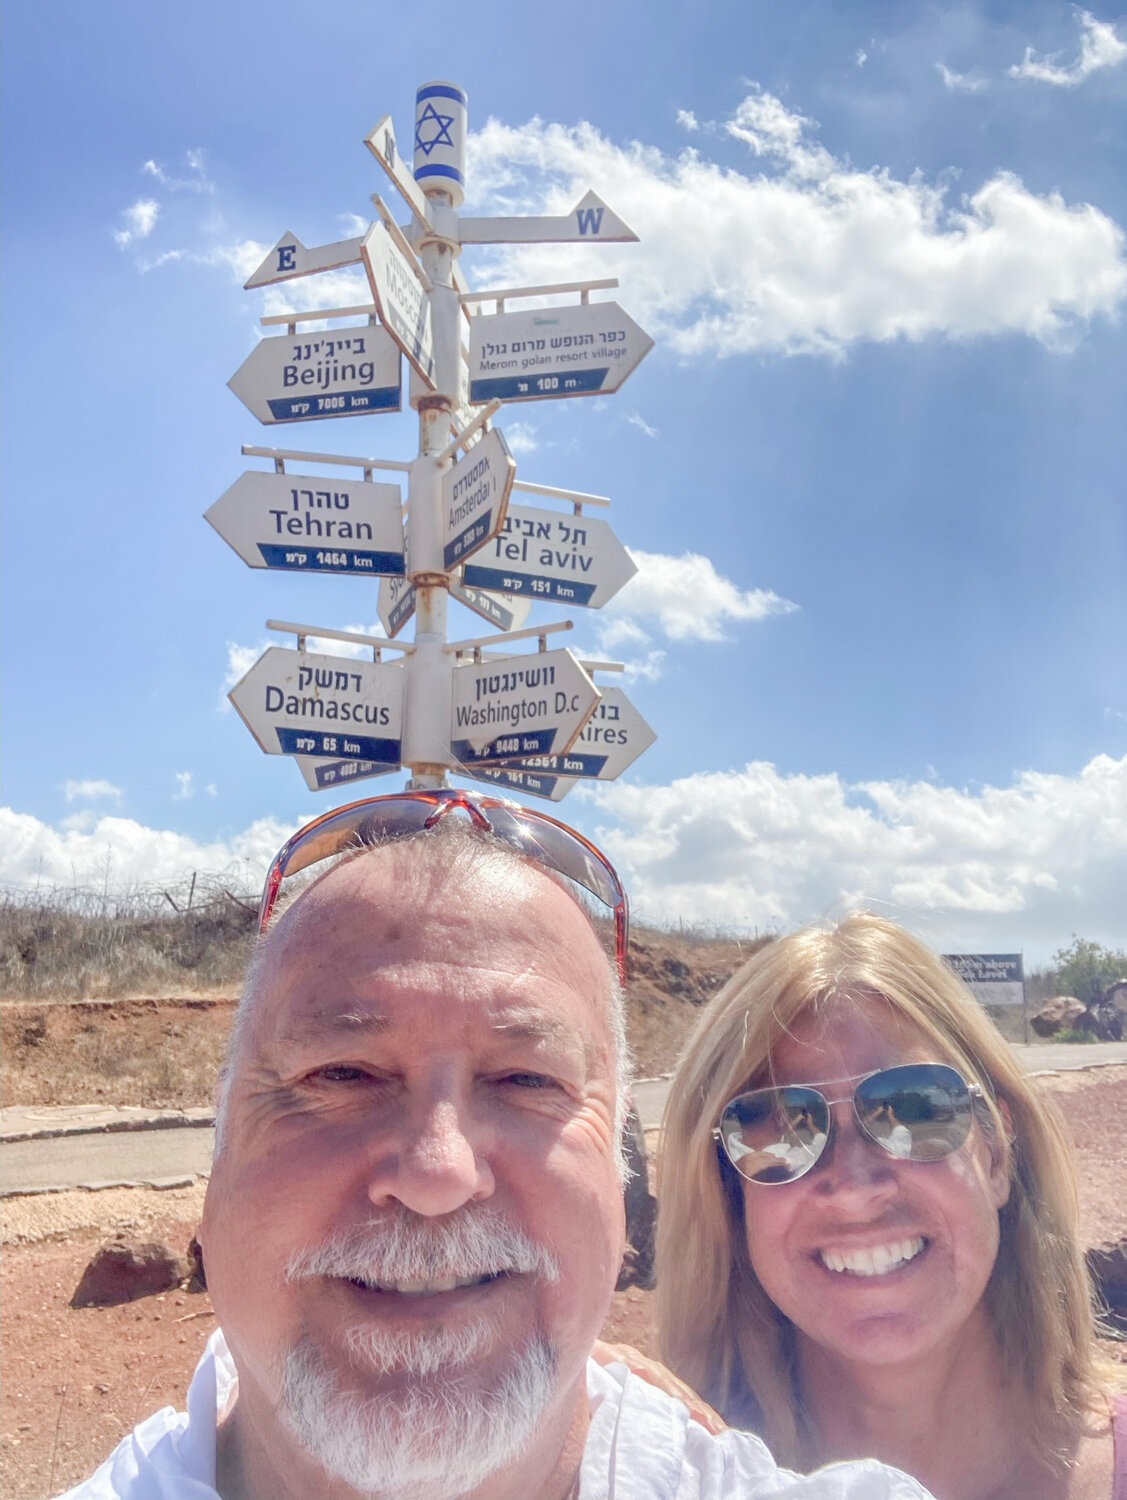 Jon and Susy Curtner pose on top of Mount Bental, Israel. Jon said the mountain peak used to be a military outpost that was “instrumental in the Yom Kippur War in 1973.” He also explained that the current war started almost “50 years to the day” on the anniversary of the Yom Kippur War.